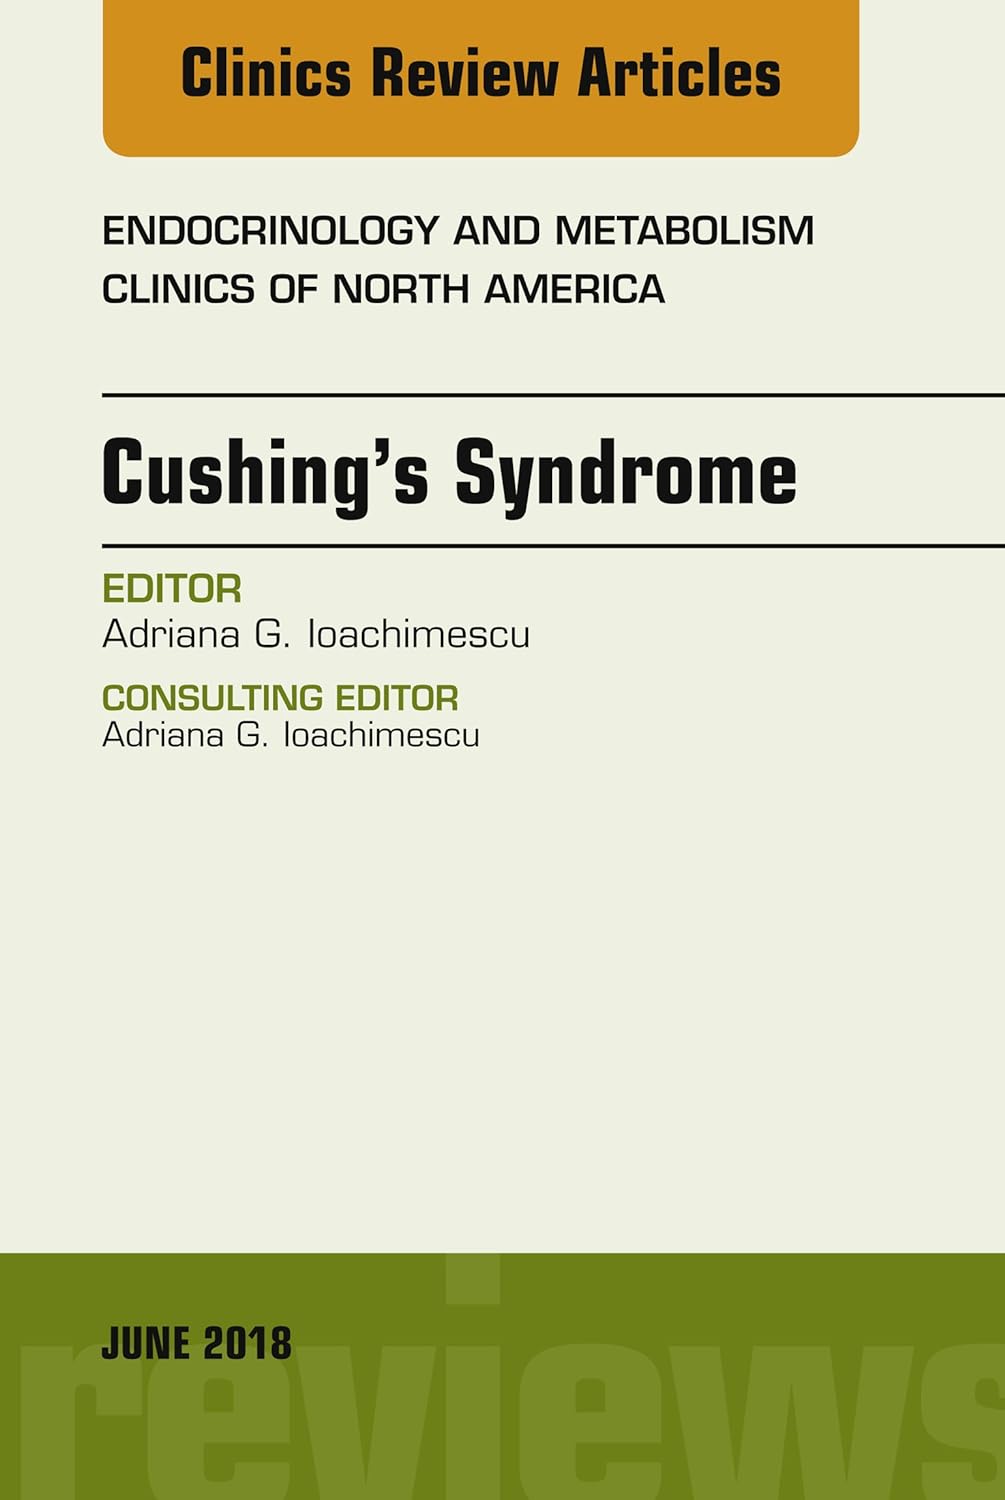 Cushing s Syndrome, An Issue of Endocrinology and Metabolism Clinics of North America (Volume 47-2) (The Clinics: Internal Medicine, Volume 47-2) by Adriana G. Ioachimescu 